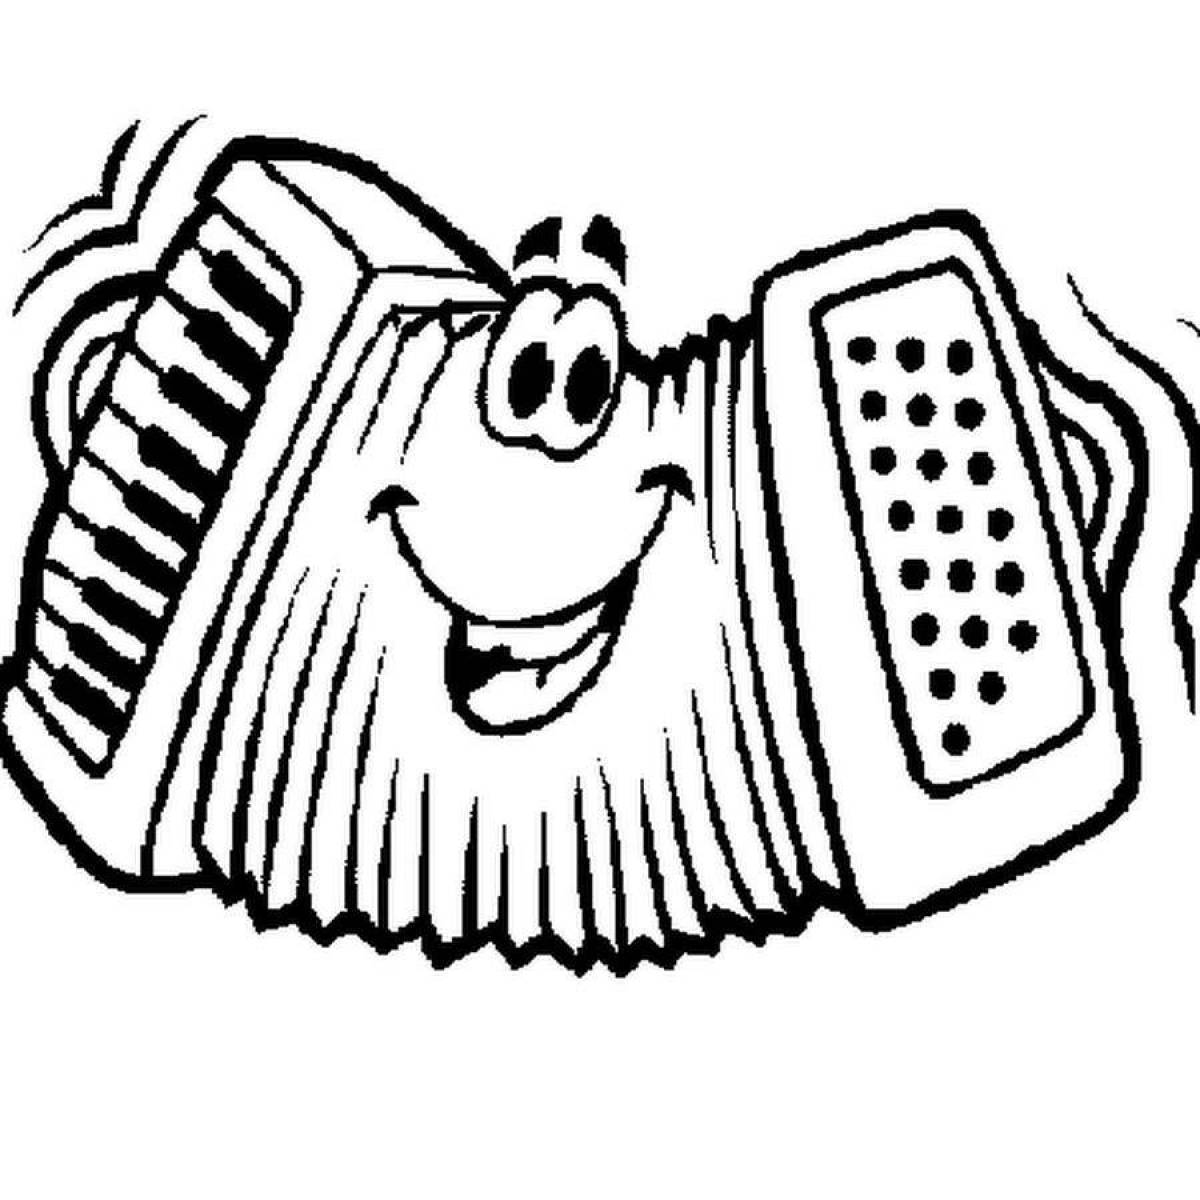 Delightful accordion coloring book for toddlers